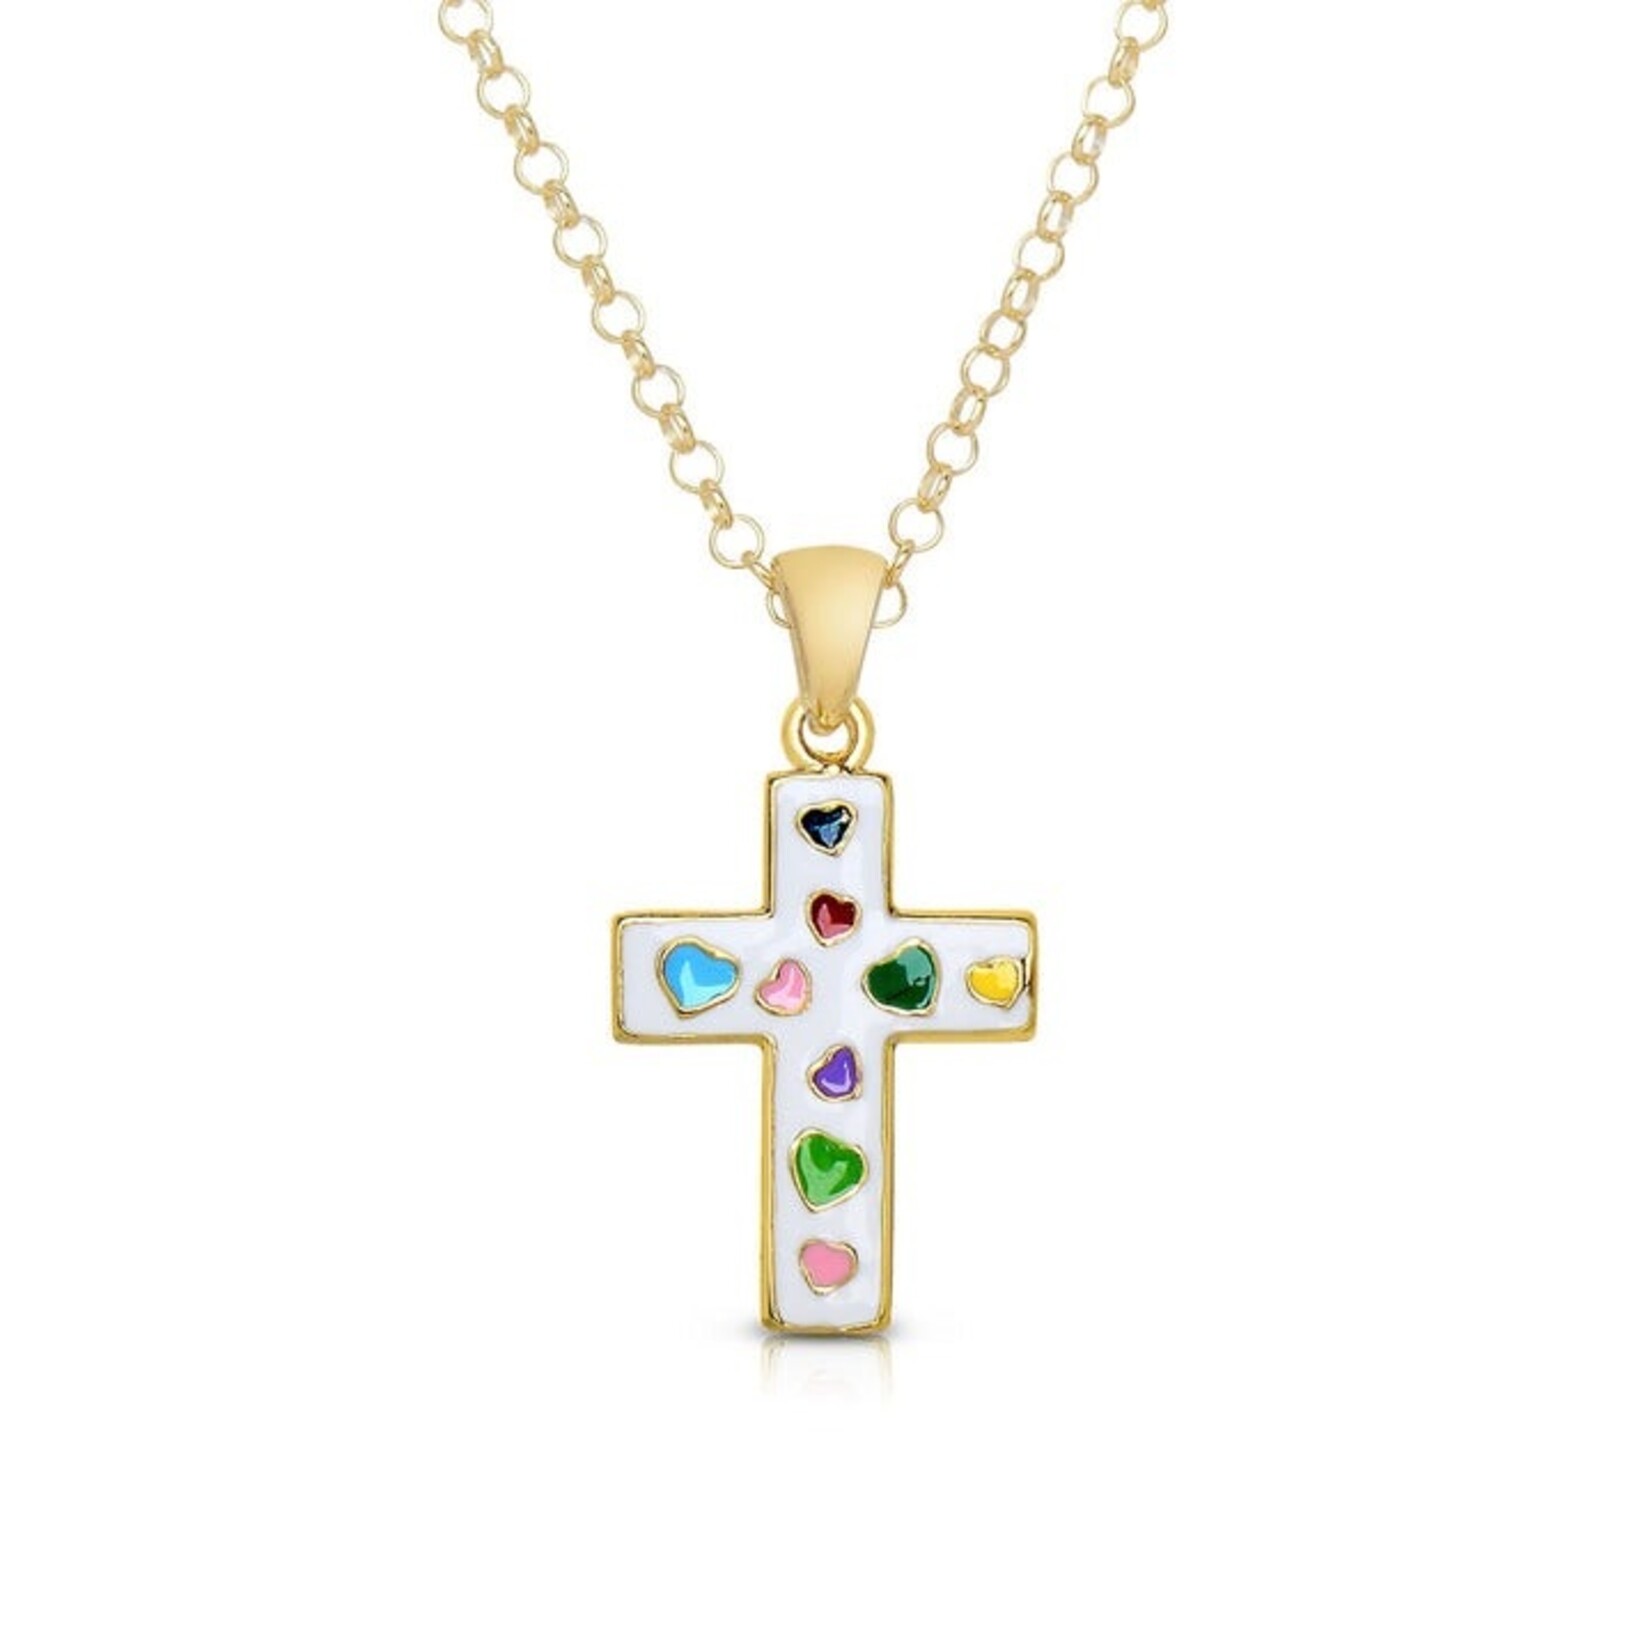 Lily Nily White Cross Necklace W/Hearts